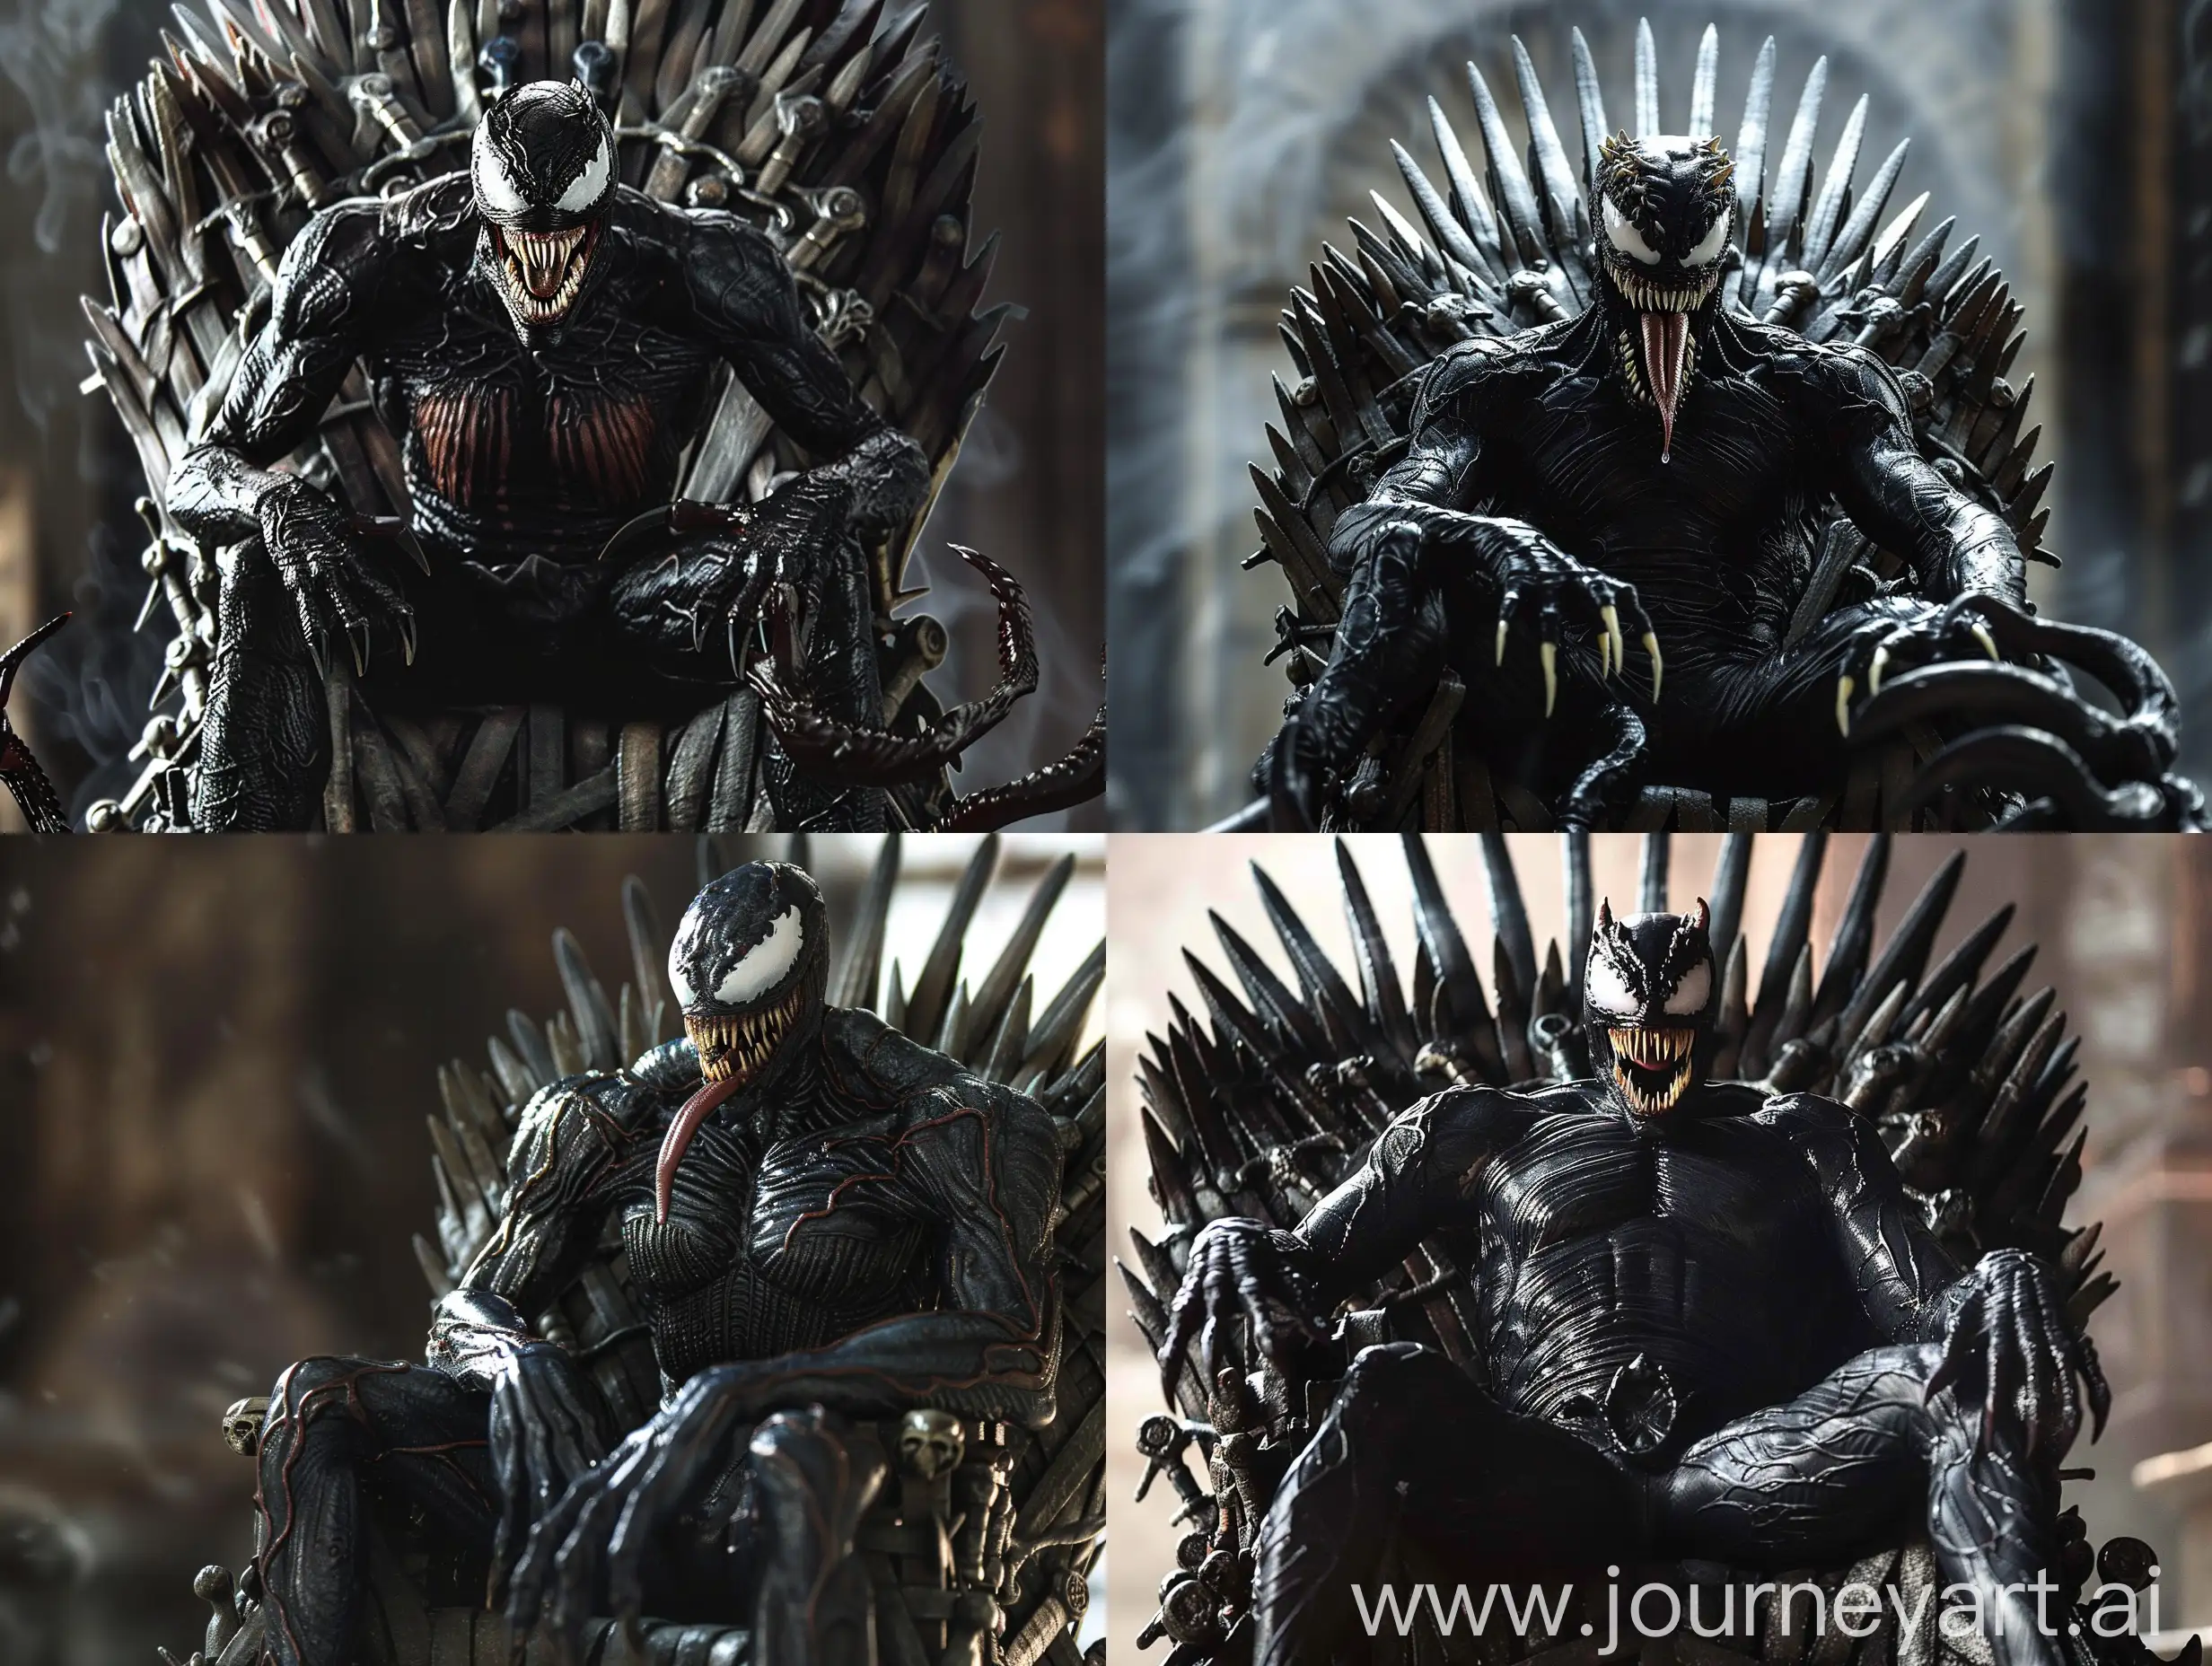 Venom sitting on the Iron Throne from Game of Thrones